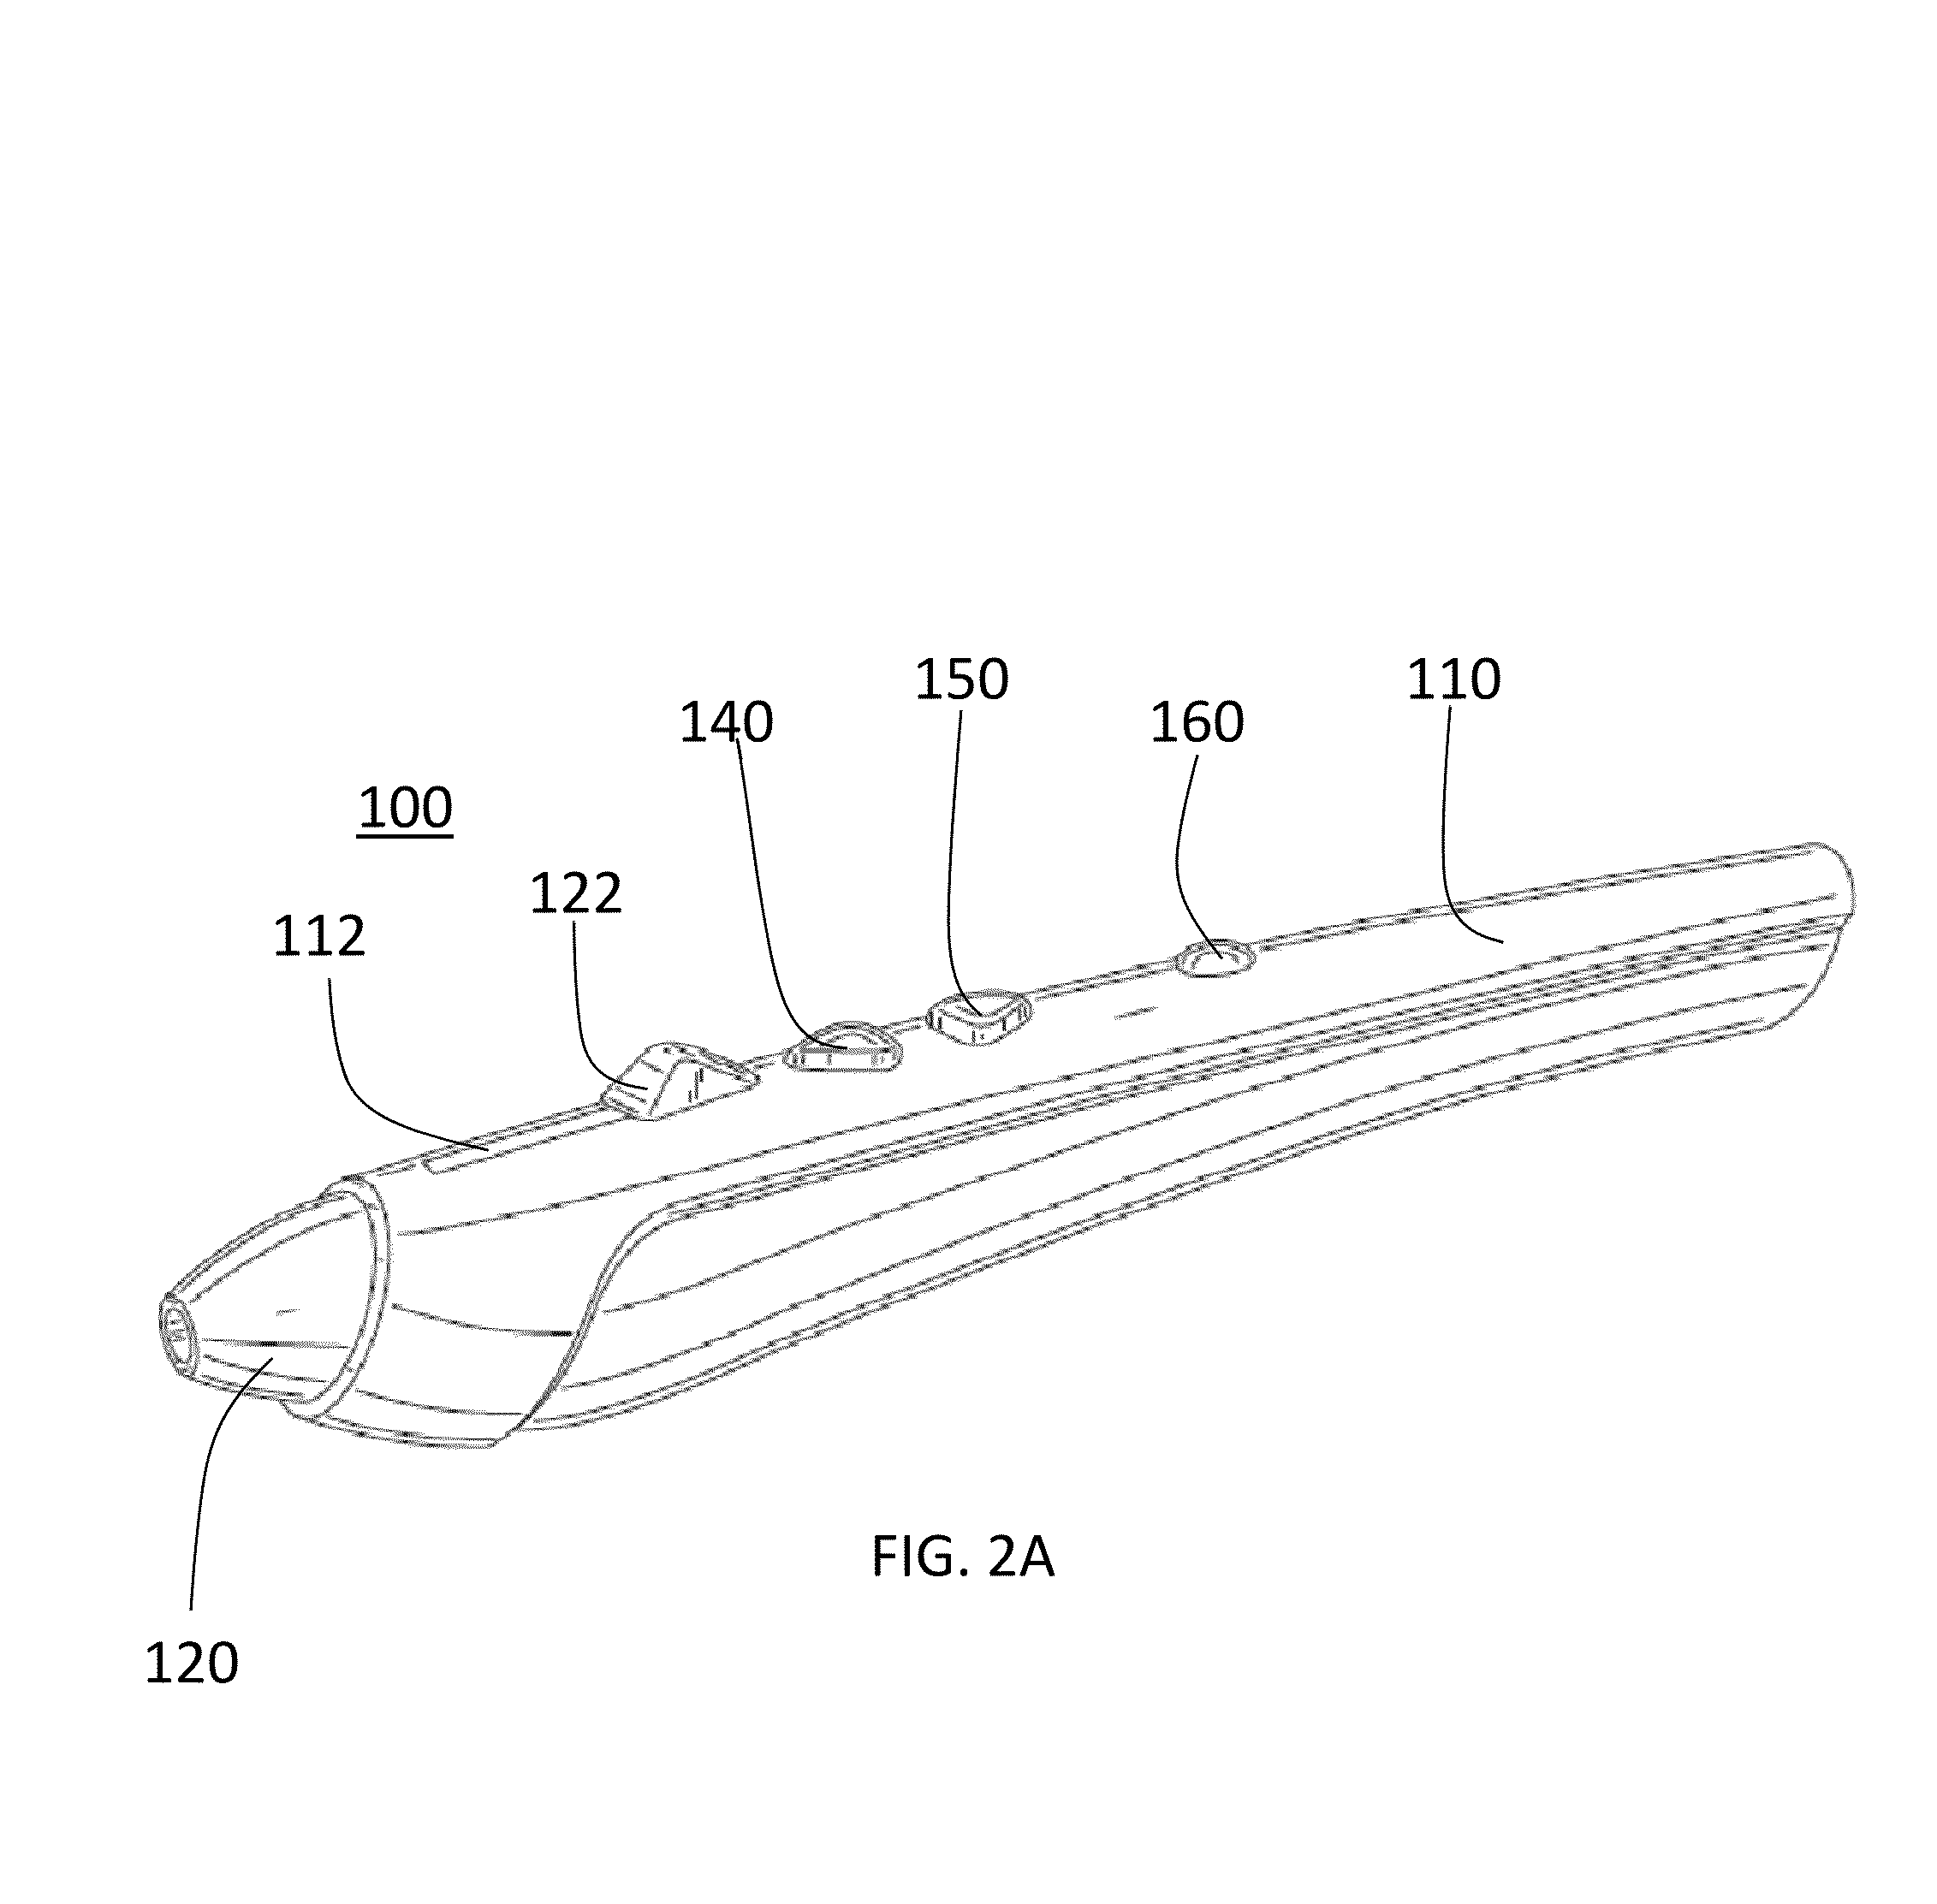 System and Method for Electrosurgical Conductive Gas Cutting for Improving Eschar, Sealing Vessels and Tissues